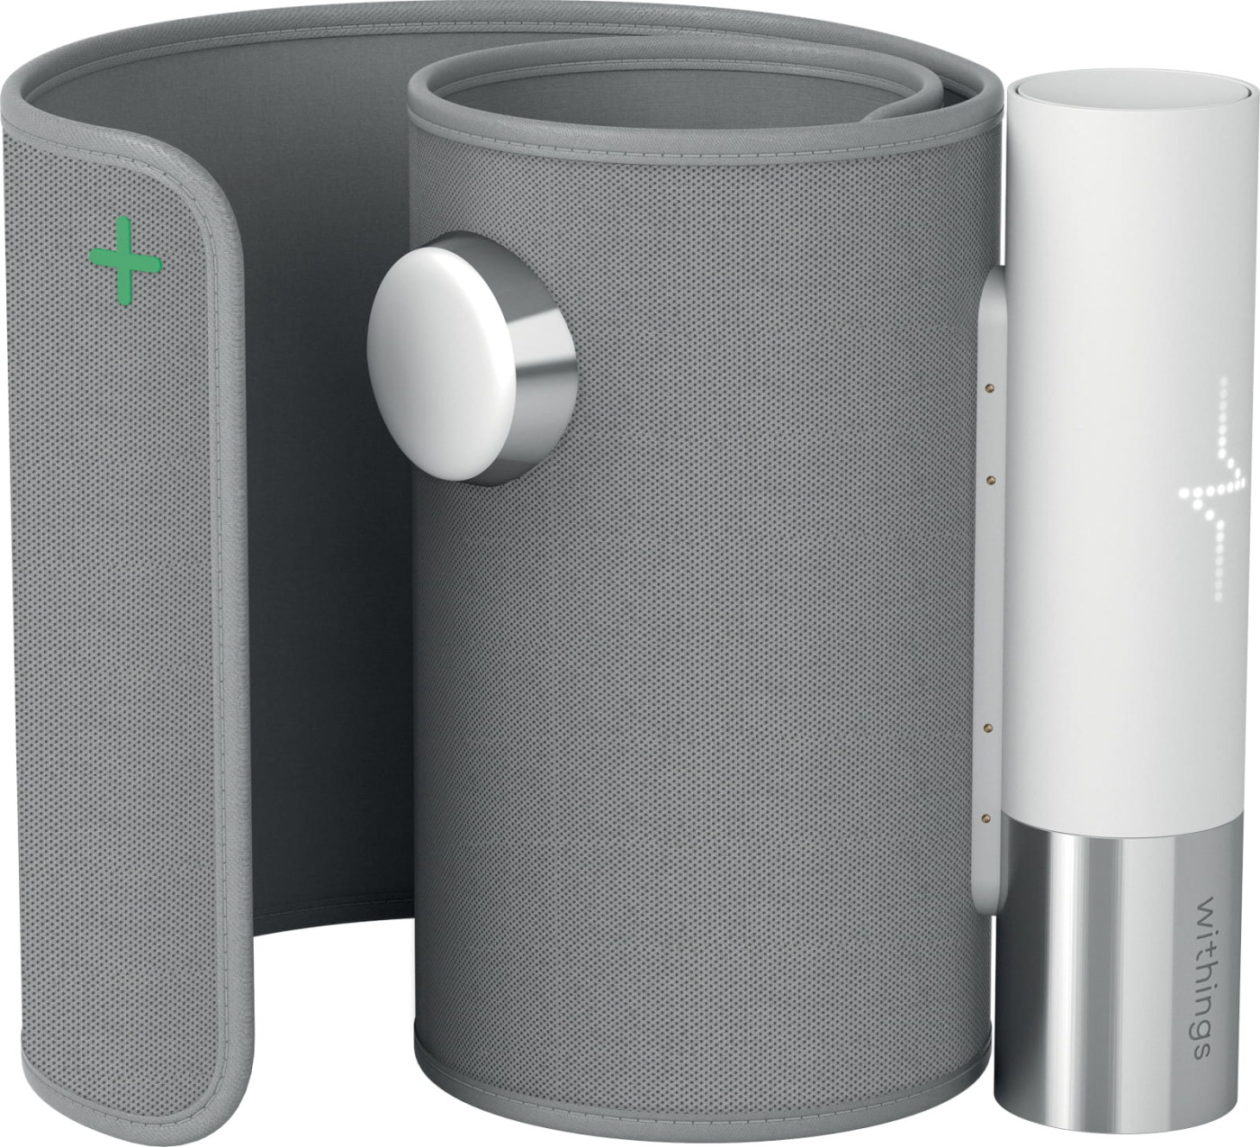 Withings ECG blood pressure monitor launched